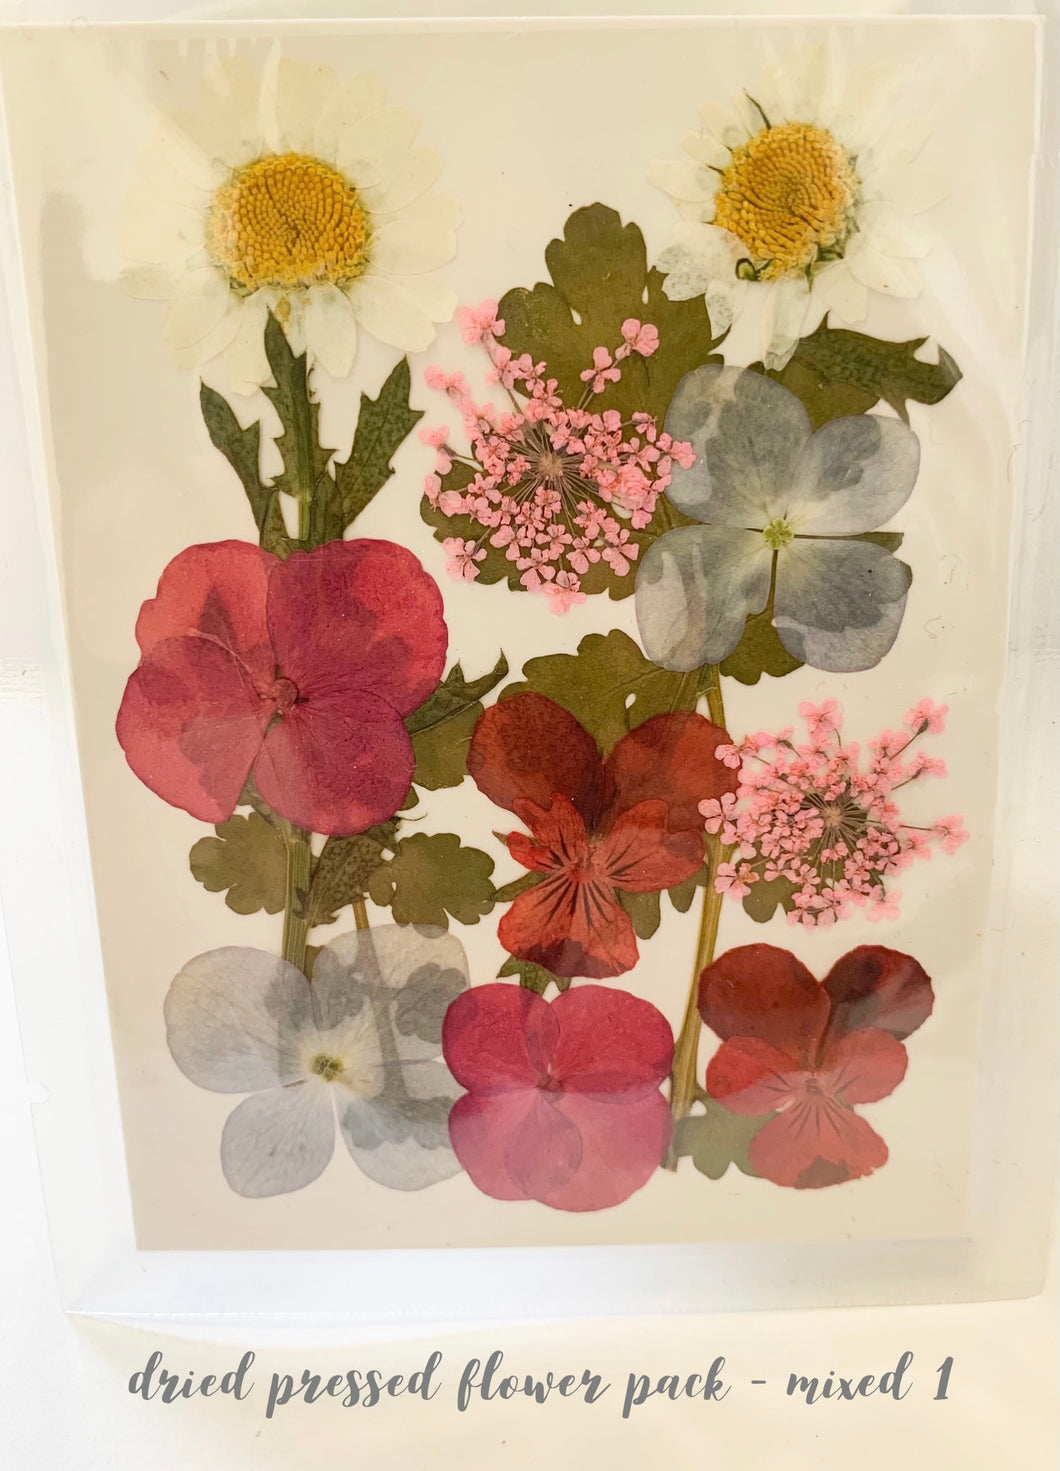 Small Dried Pressed Flower Pack - Mixed 1